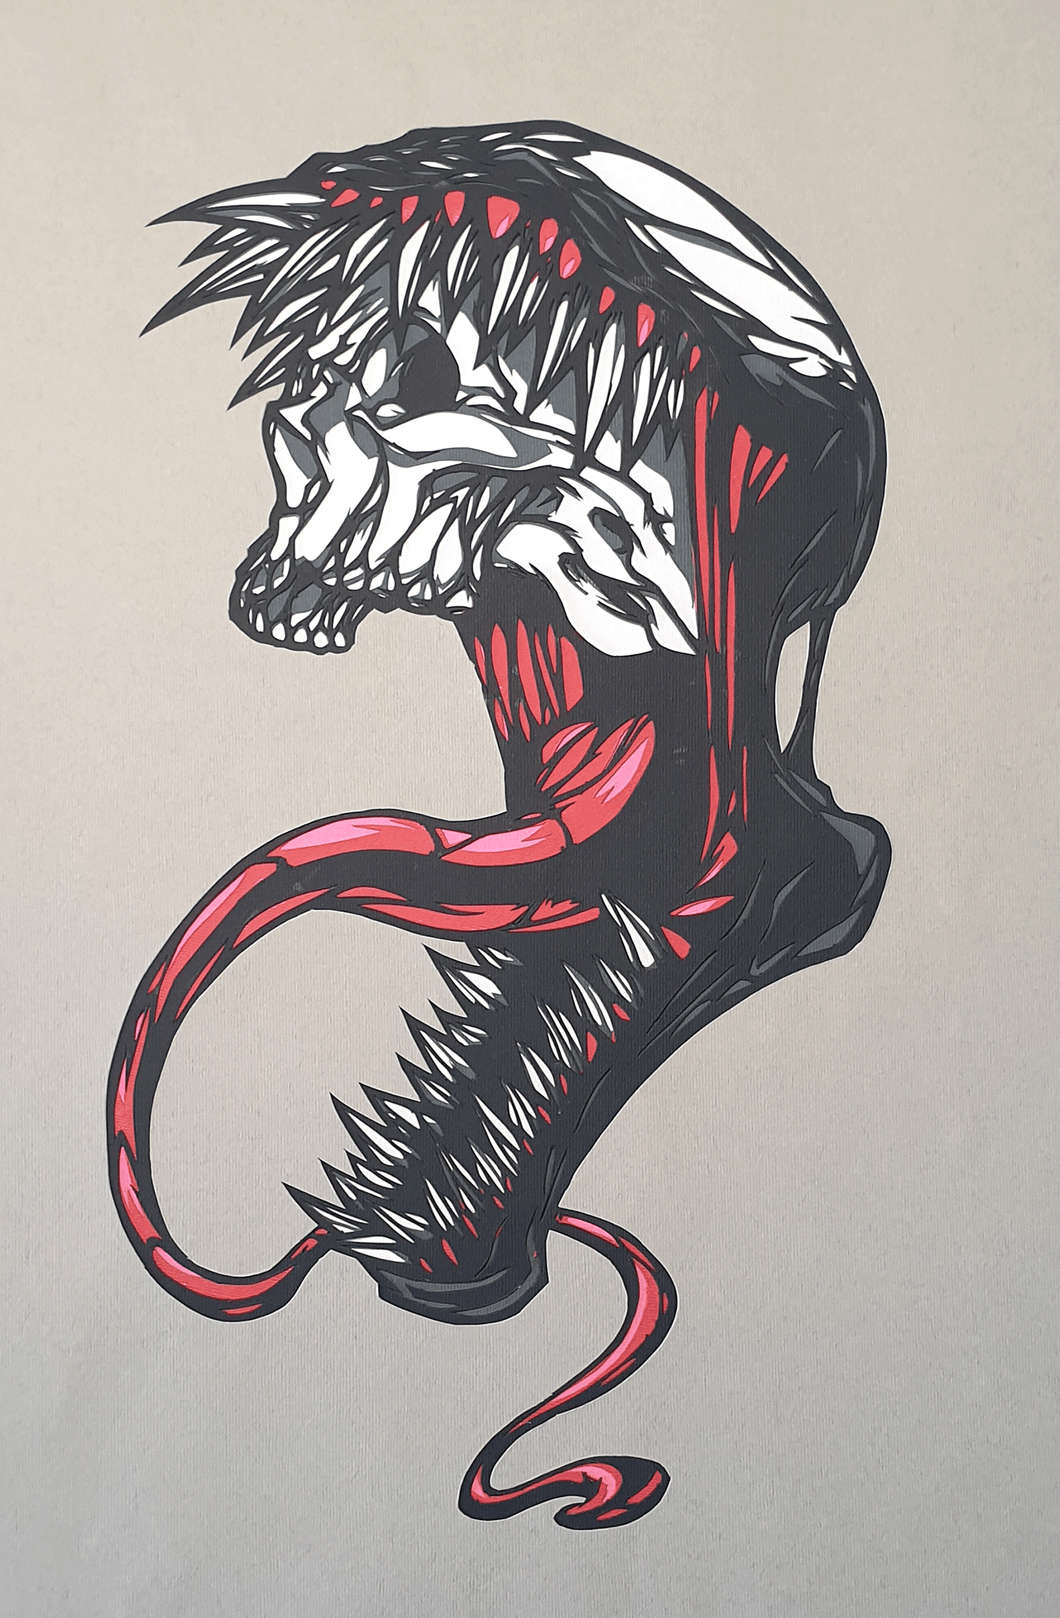 Venom Skull by Rick Sharif - FRAMED [A3 Size (297 x 420 mm) (11.7 x 16.5 in) in a FRAME]